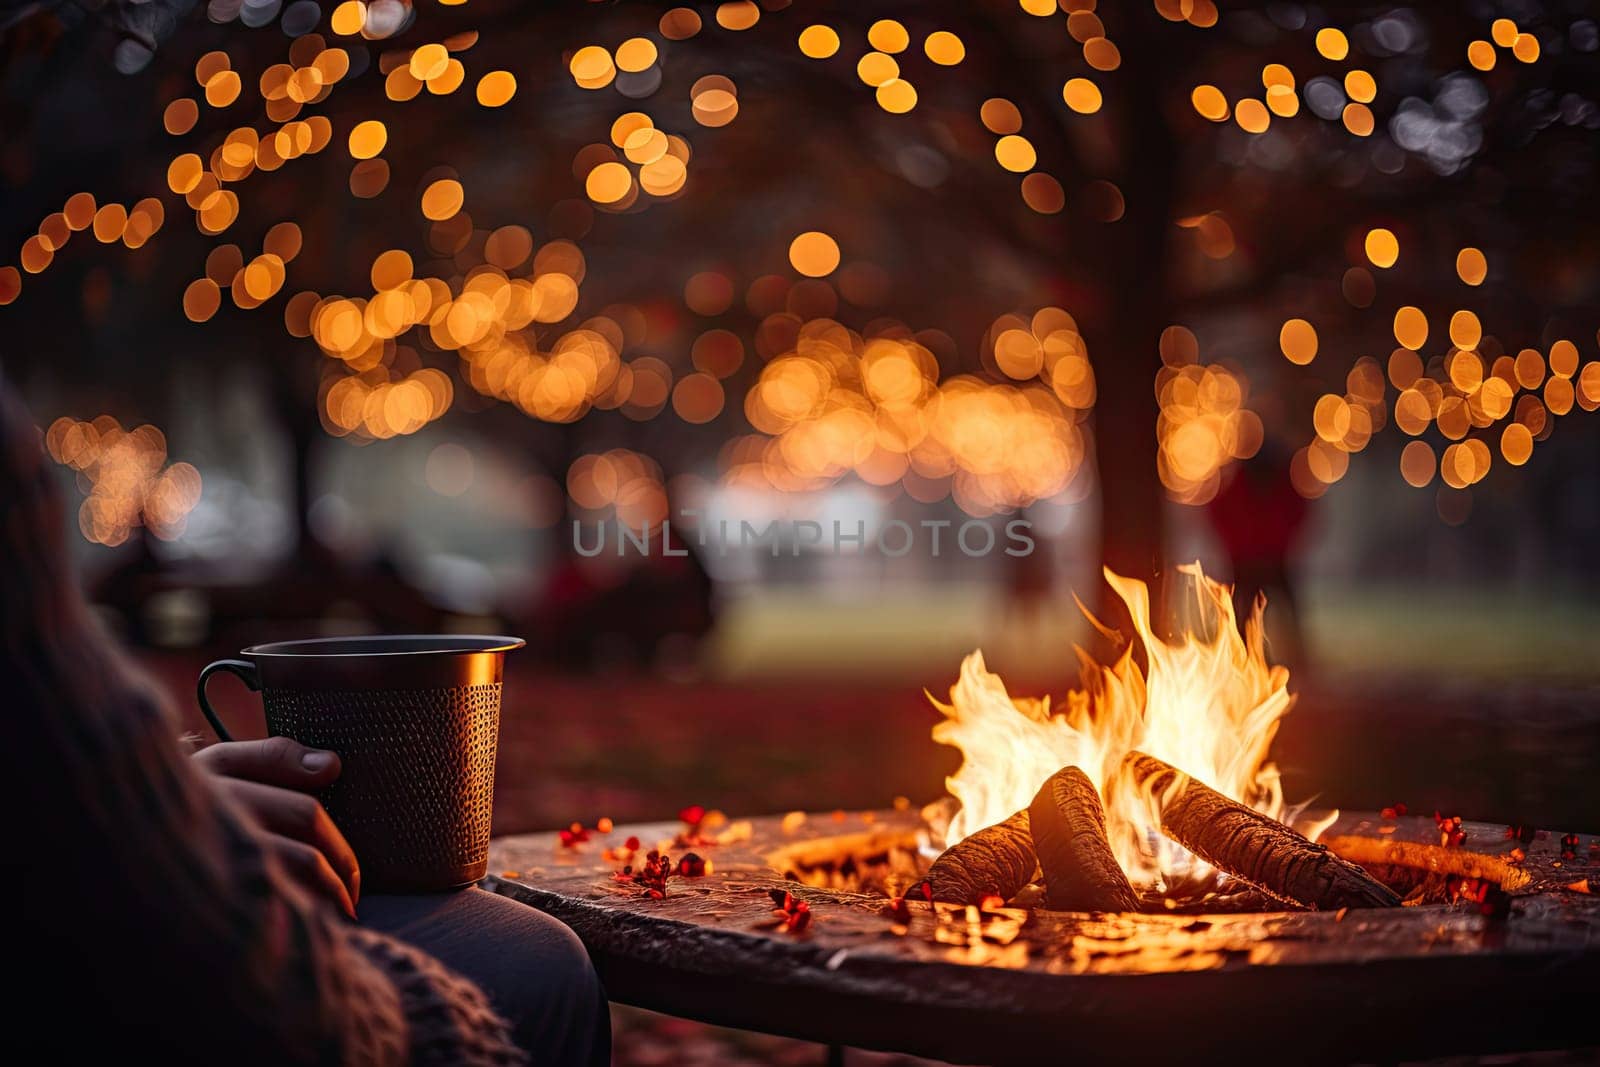 Warmth and Contemplation: A Person Sitting in Front of a Cozy Fire Pit